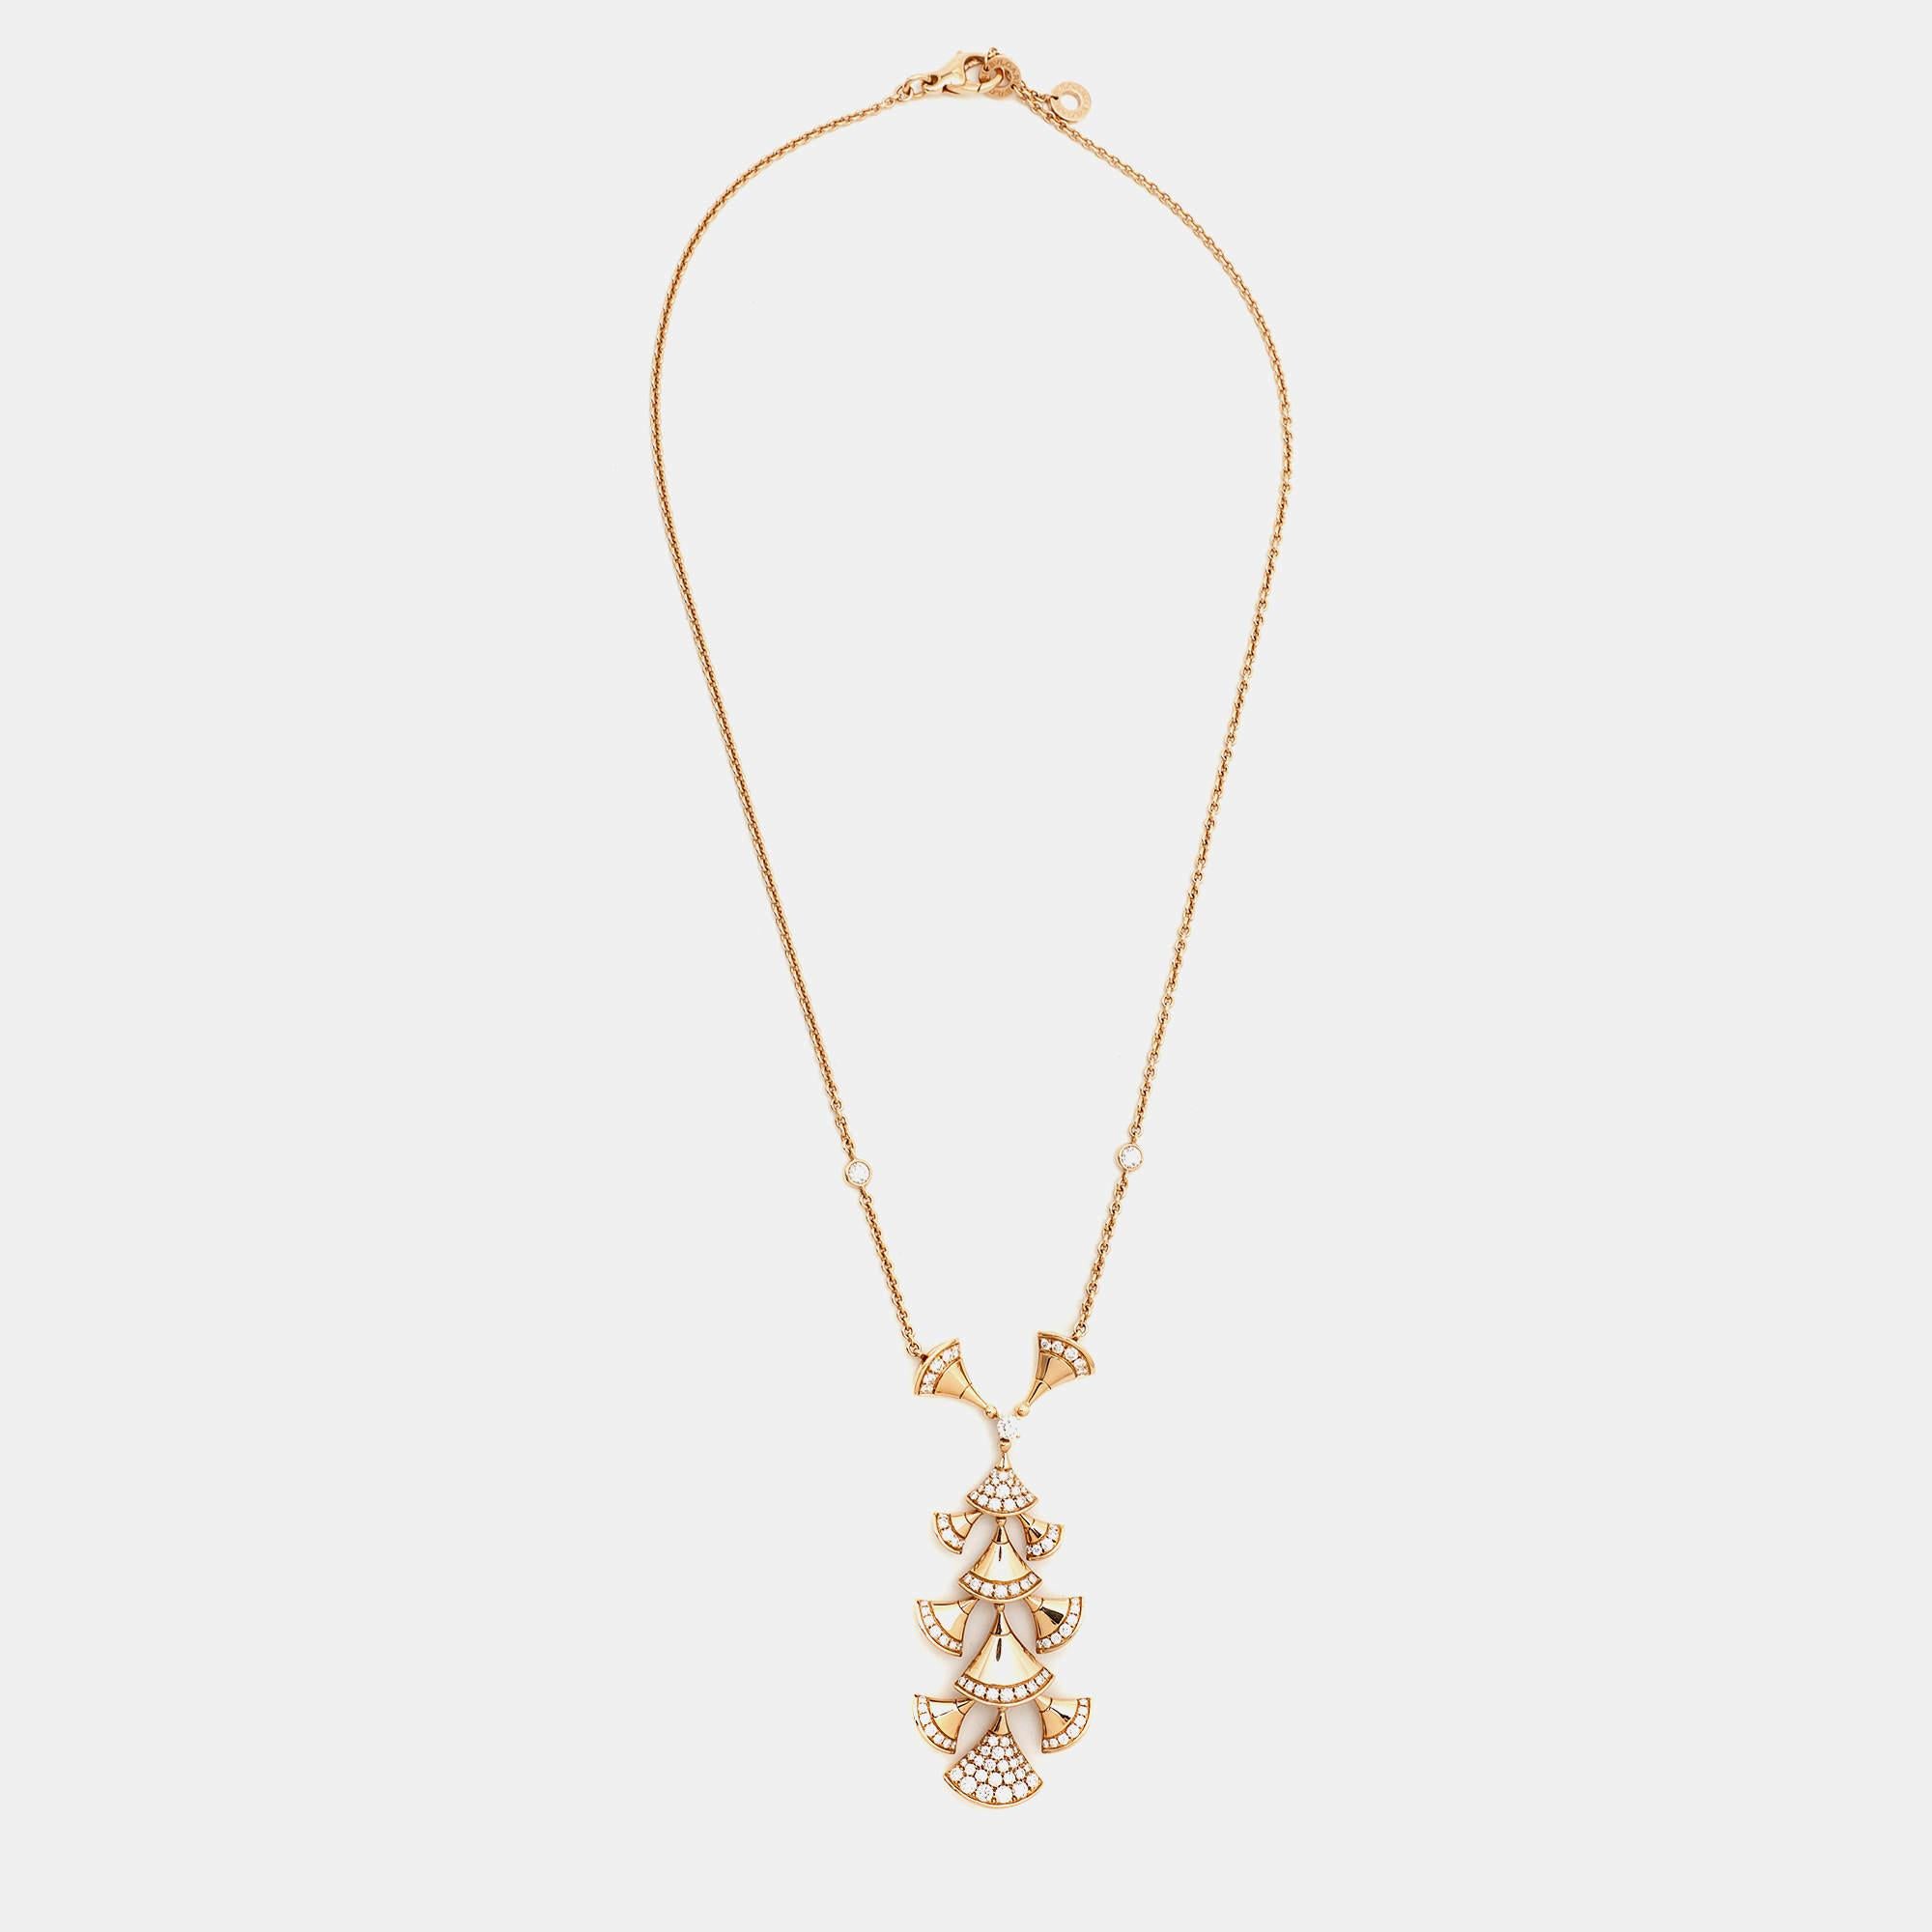 The grandeur of Italian beauty is reflected in this necklace from Bvlgari's Divas' Dream collection. The line is inspired by the fan-shaped mosaics of the Caracalla Baths in Rome, a detail the brand has interpreted with mastery. This necklace is